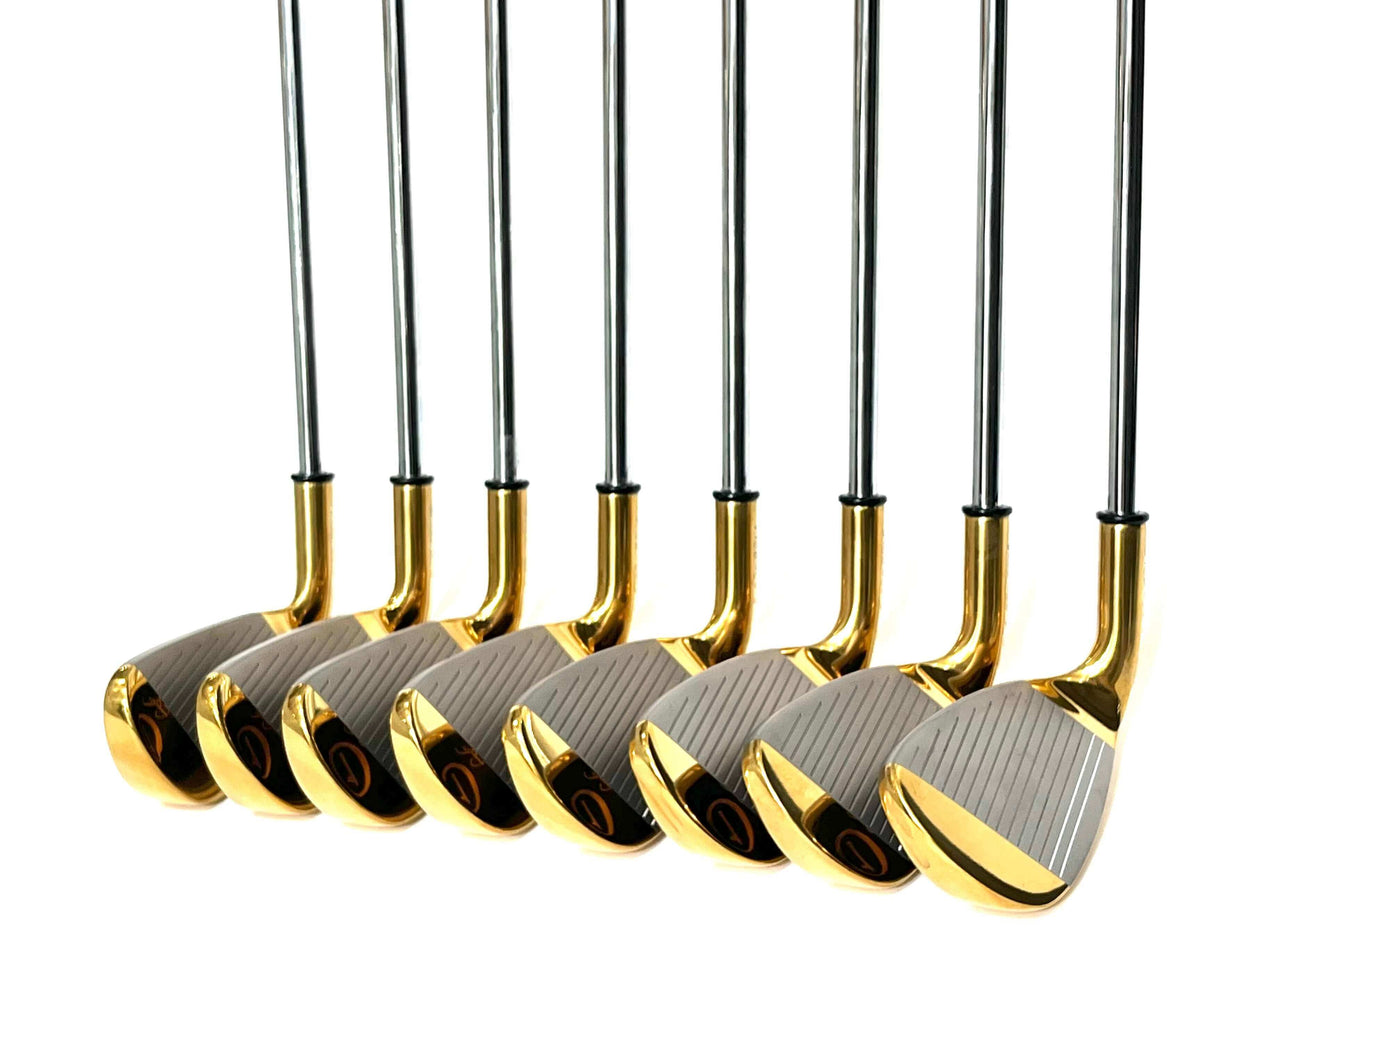 Used/Demo Regal Irons - NOW 30% OFF!